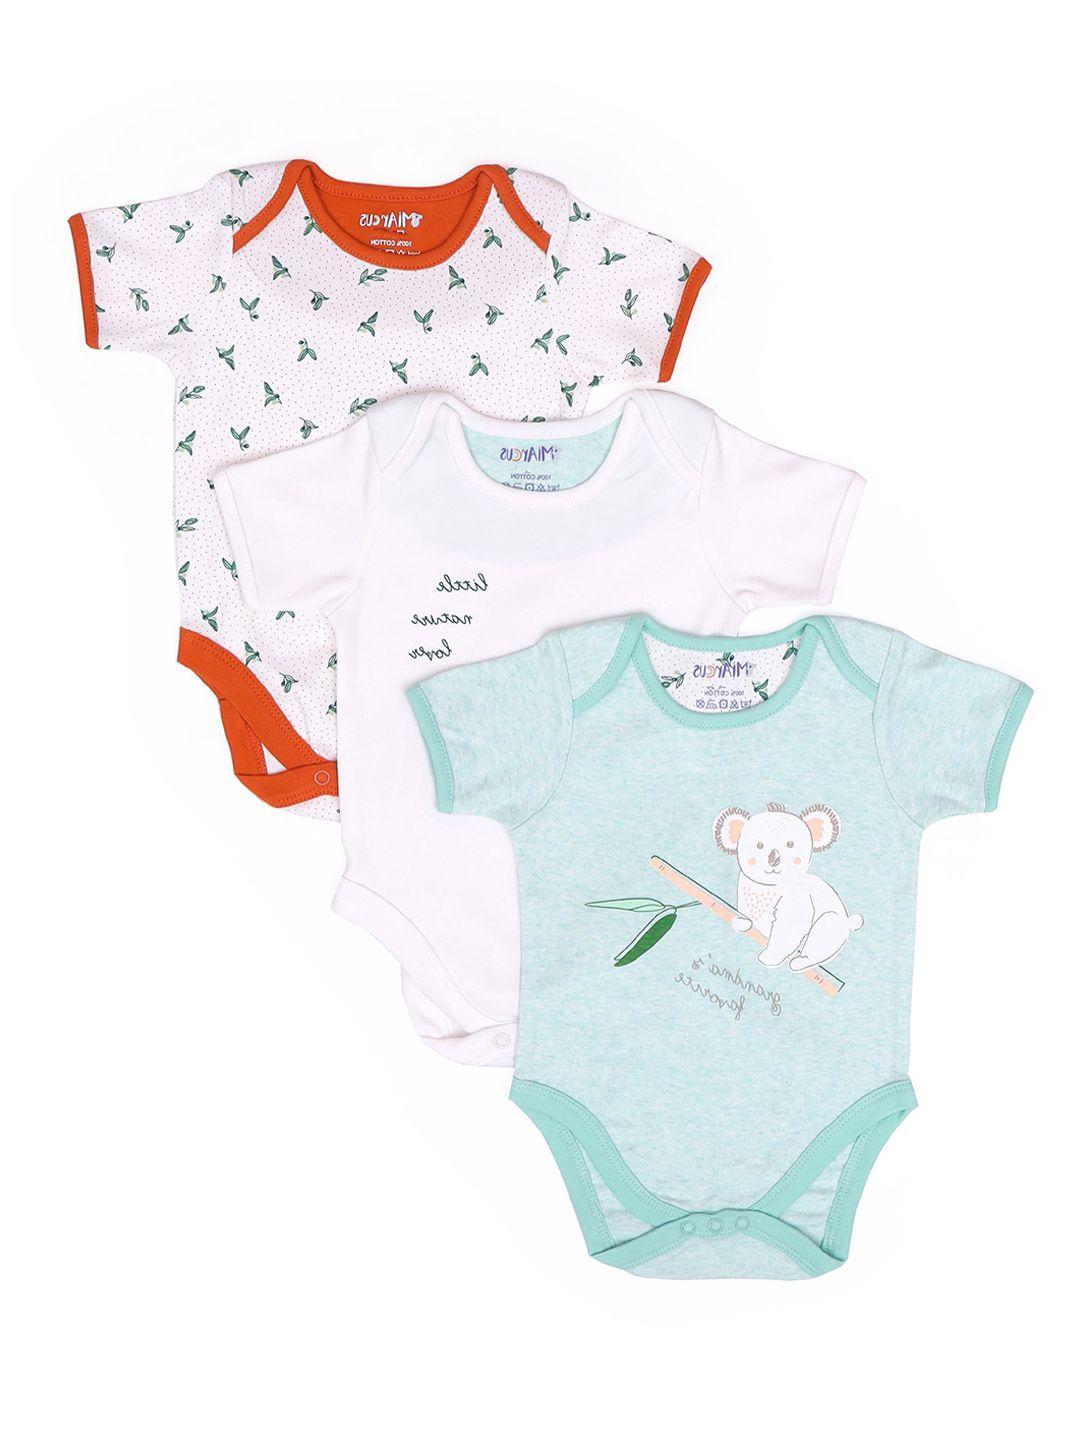 miarcus kids set of 3 knitted rompers